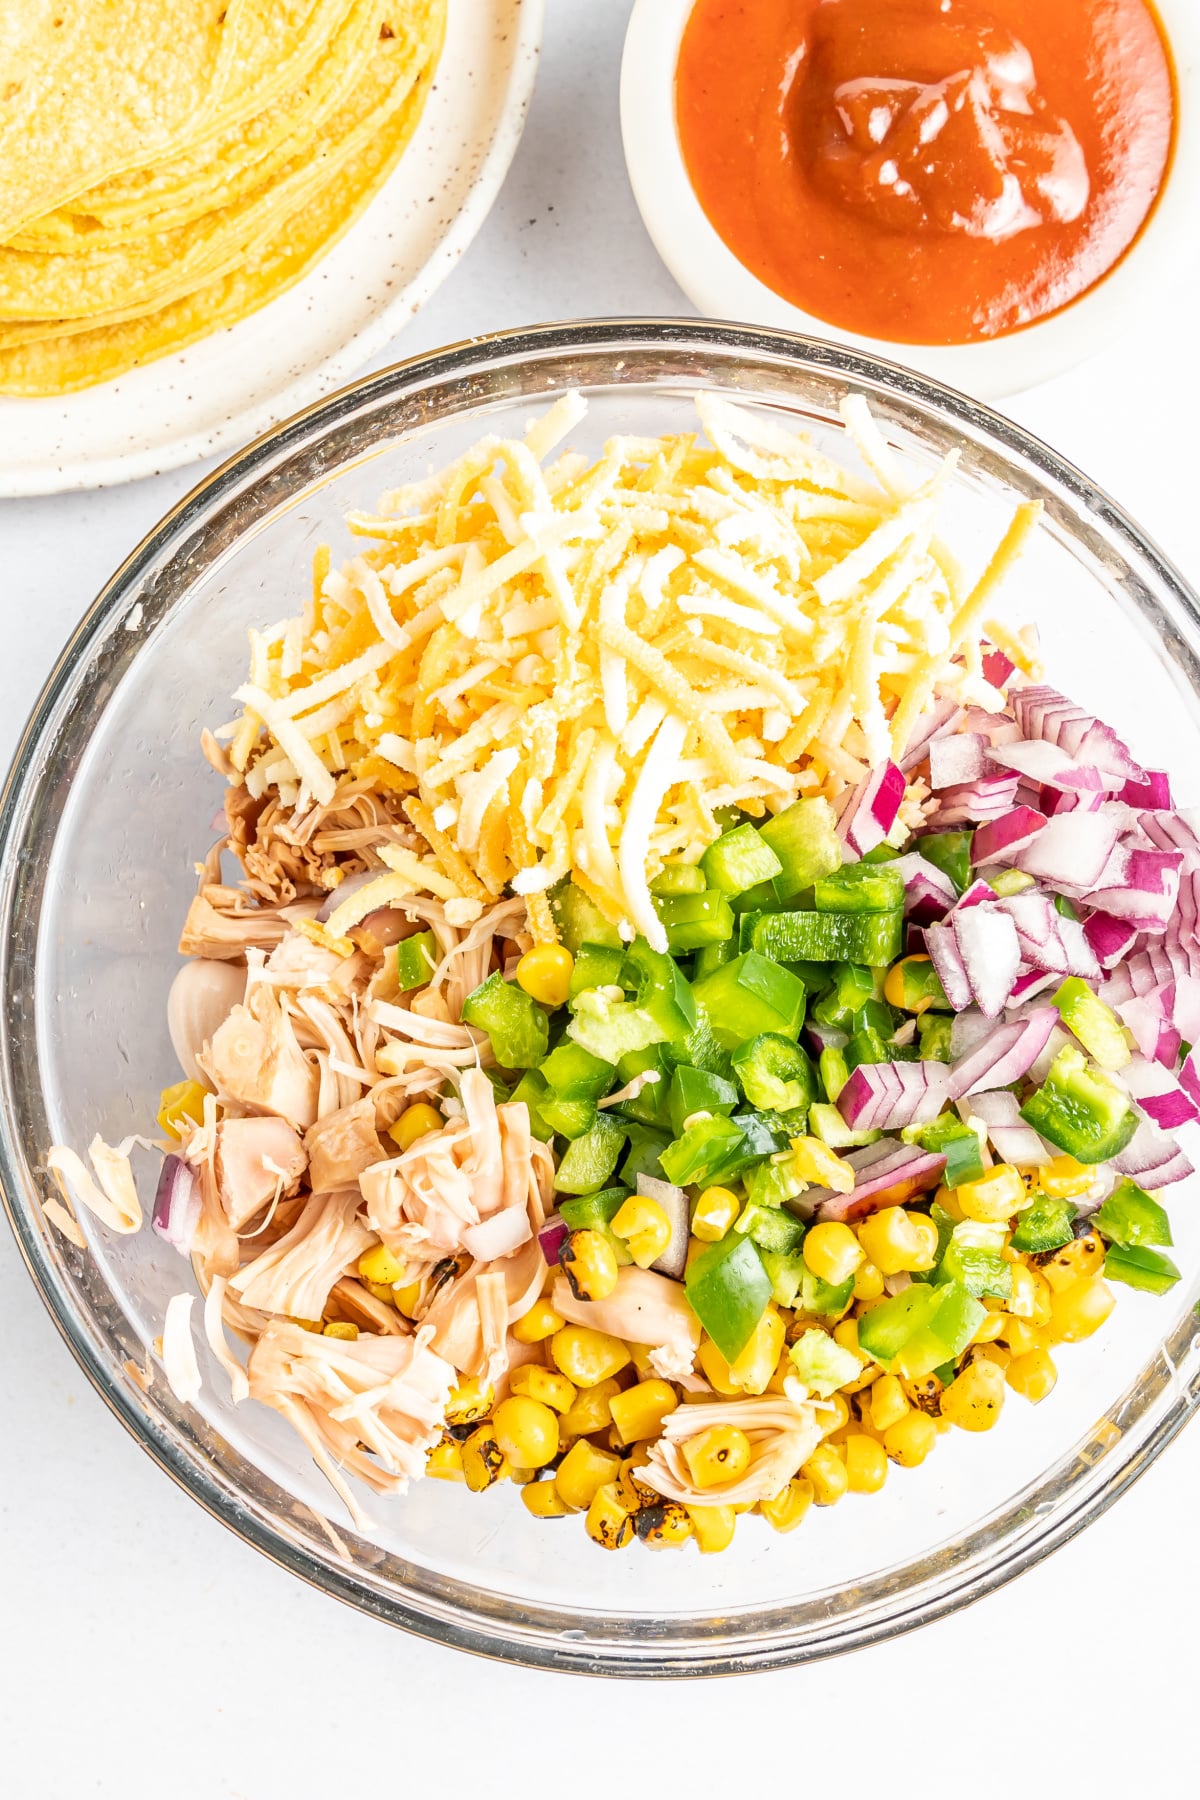 Large mixing bowl of ingredients for BBQ taquitos before mixing: jackfruit, cheese, fire roasted corn, died red onion, and diced jalapeno peppers. A smaller bowl of BBQ sauce and a stack of corn tortillas on the side.